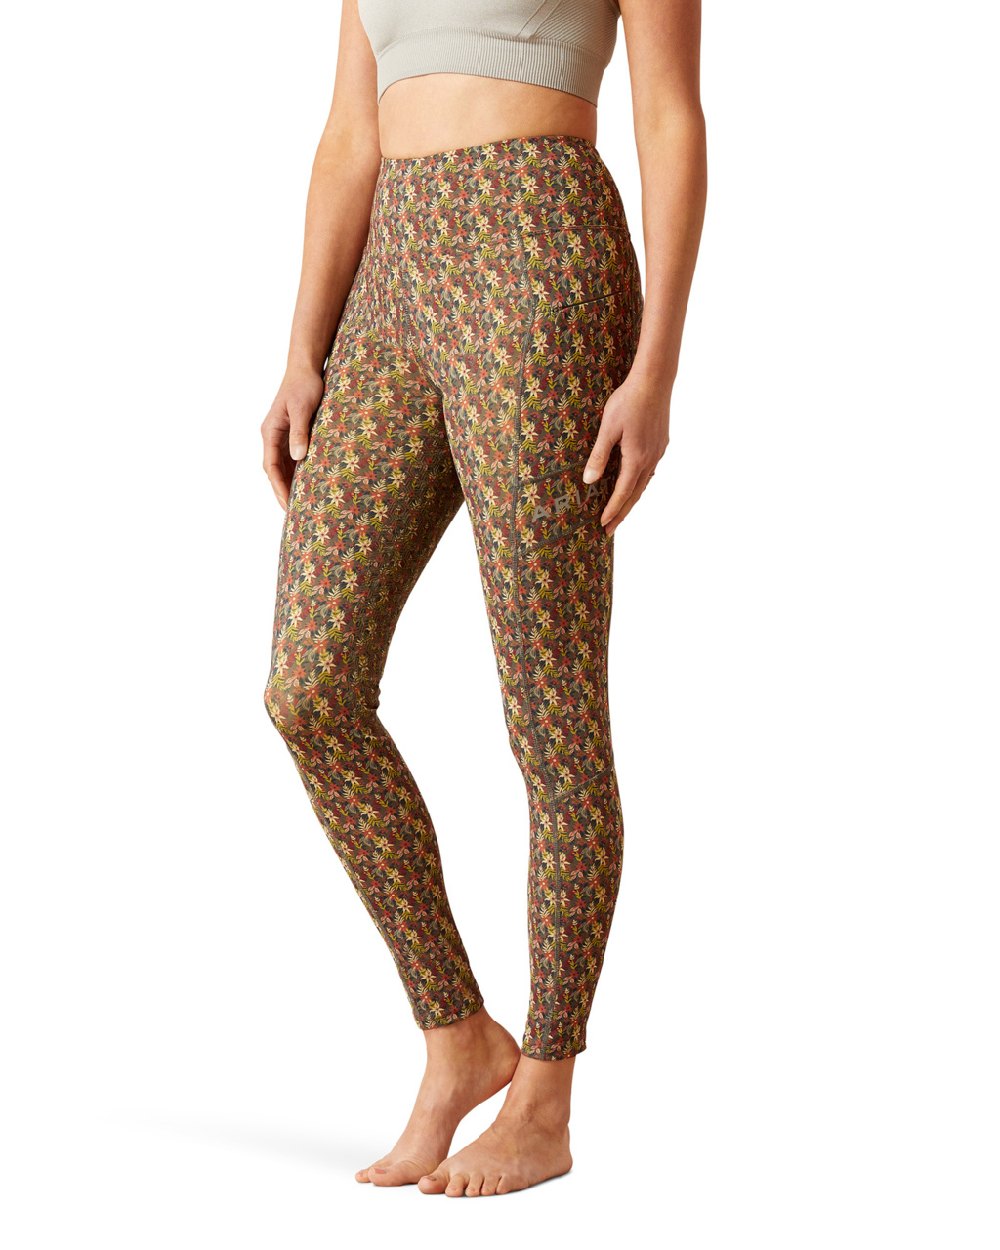 Ariat Womens Eos Print Full Seat Tights in Canteen Floral 